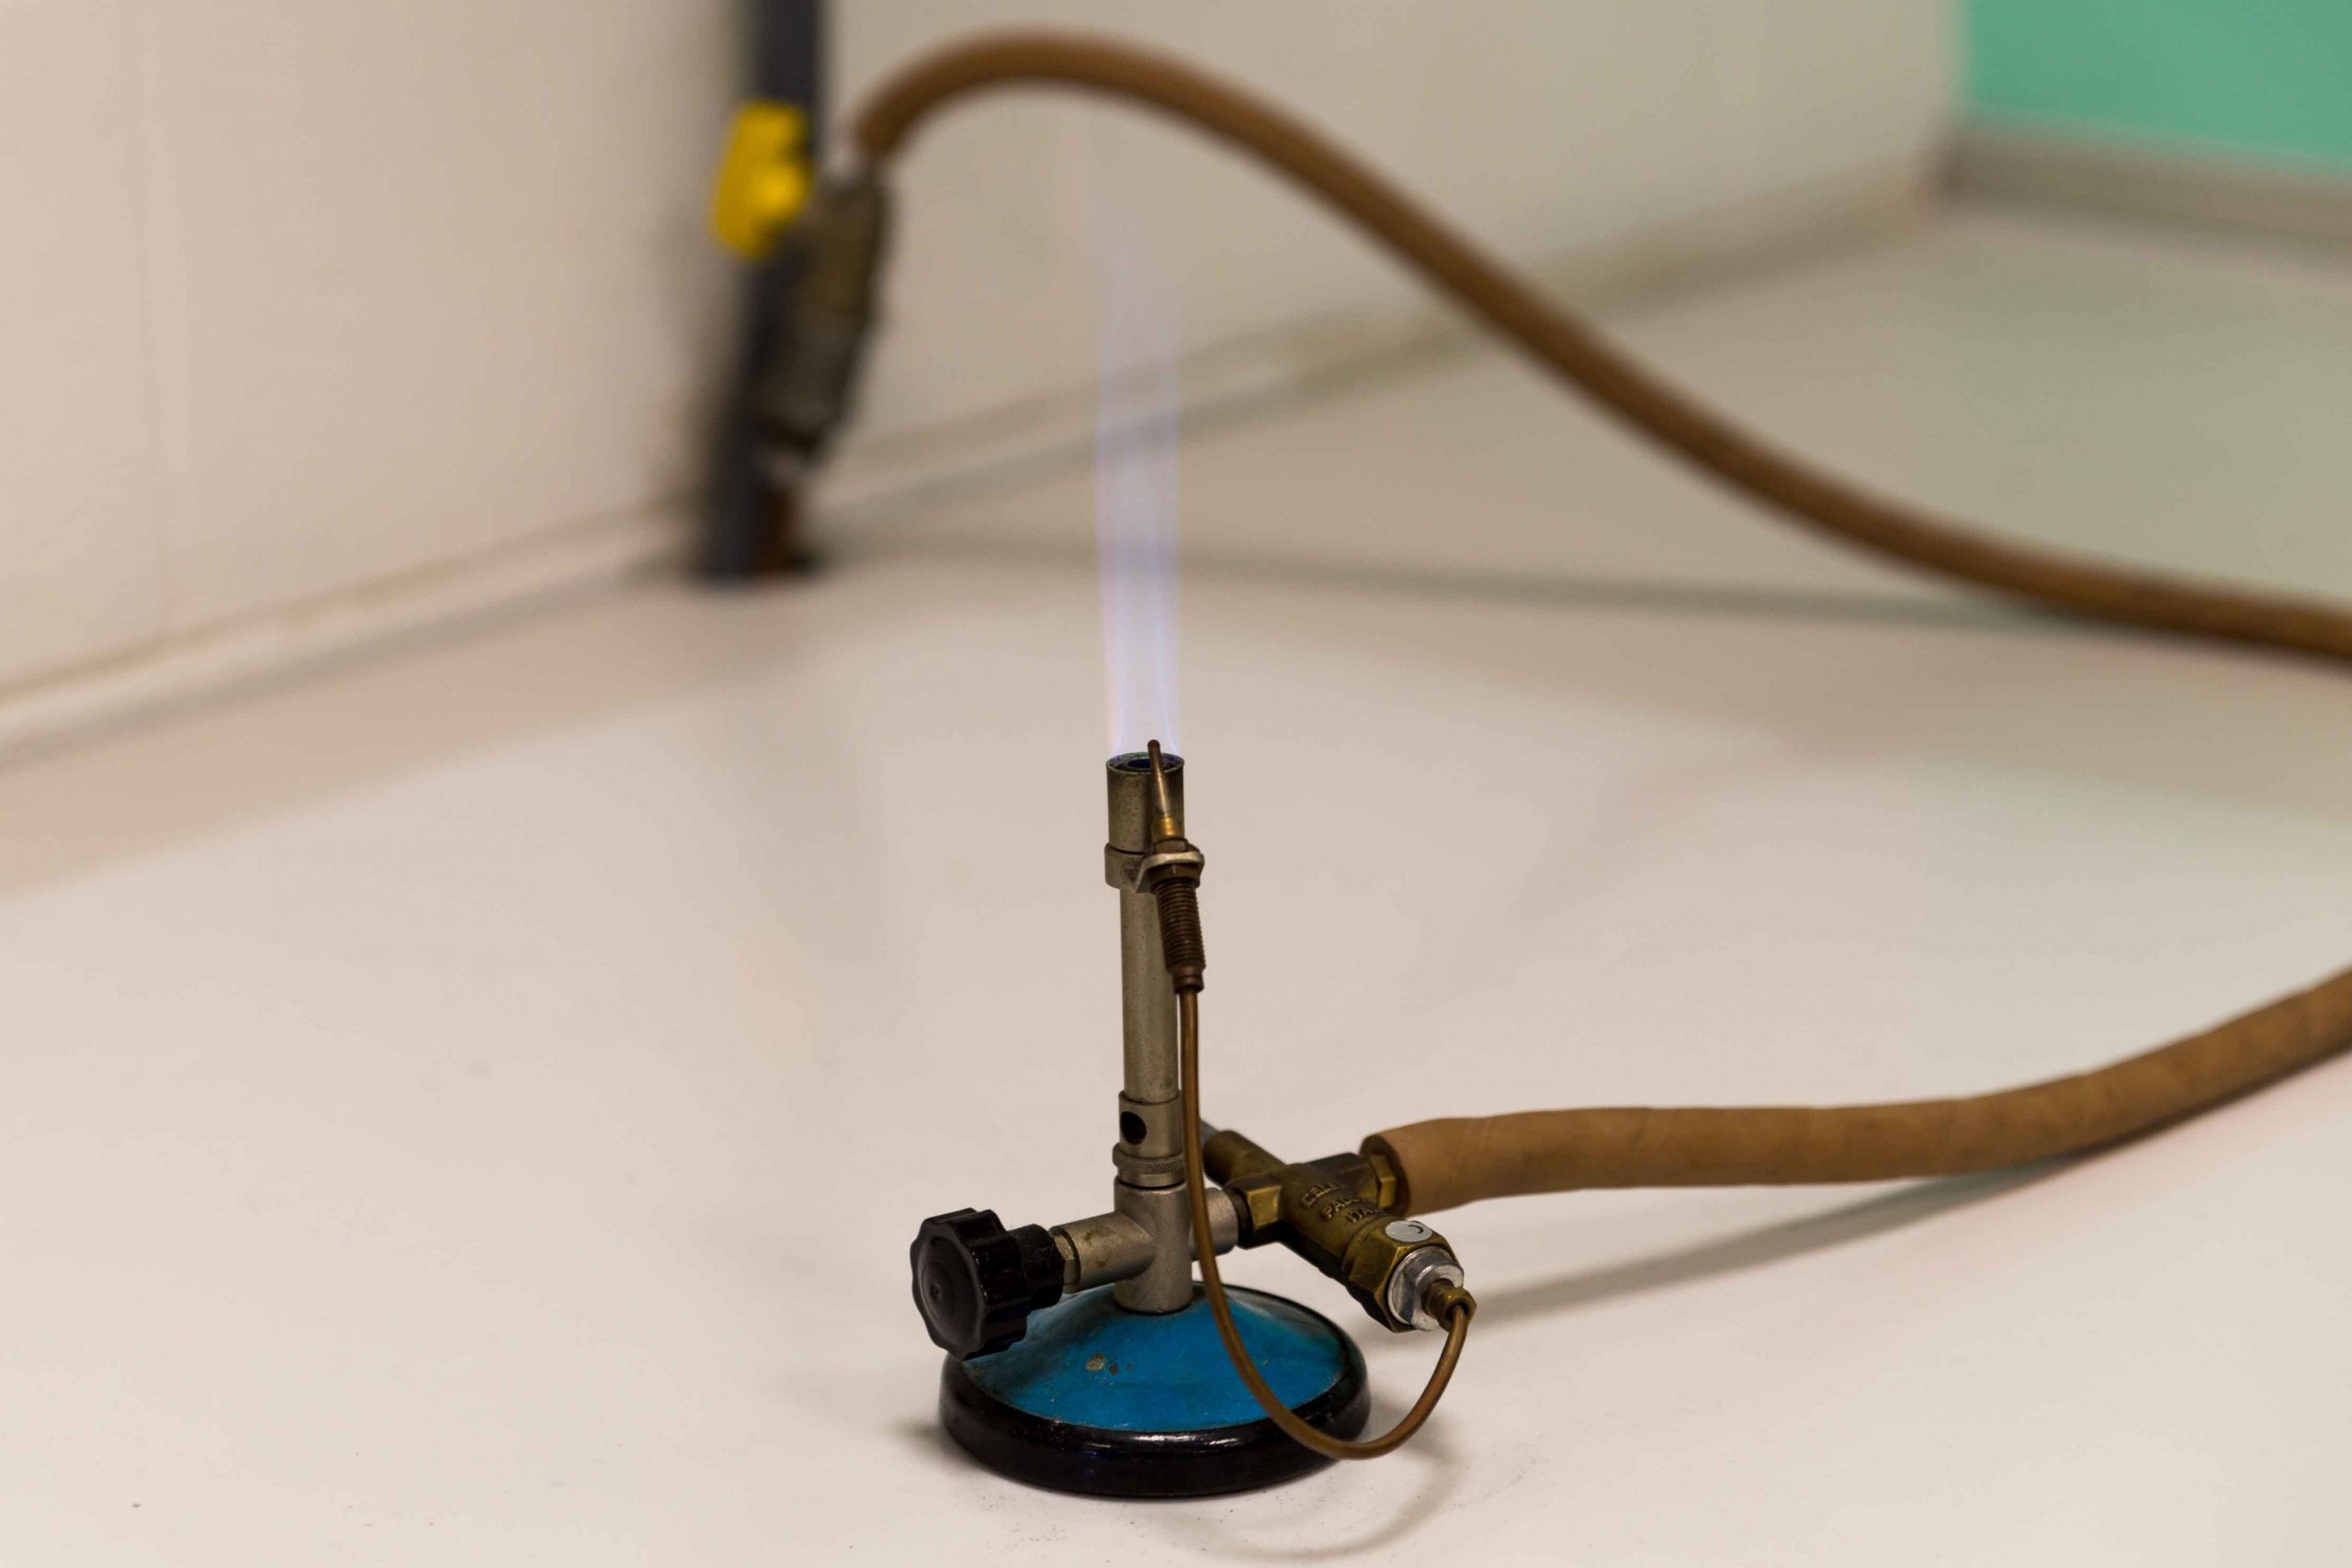 Evolve’s essential guide to the Bunsen Burner